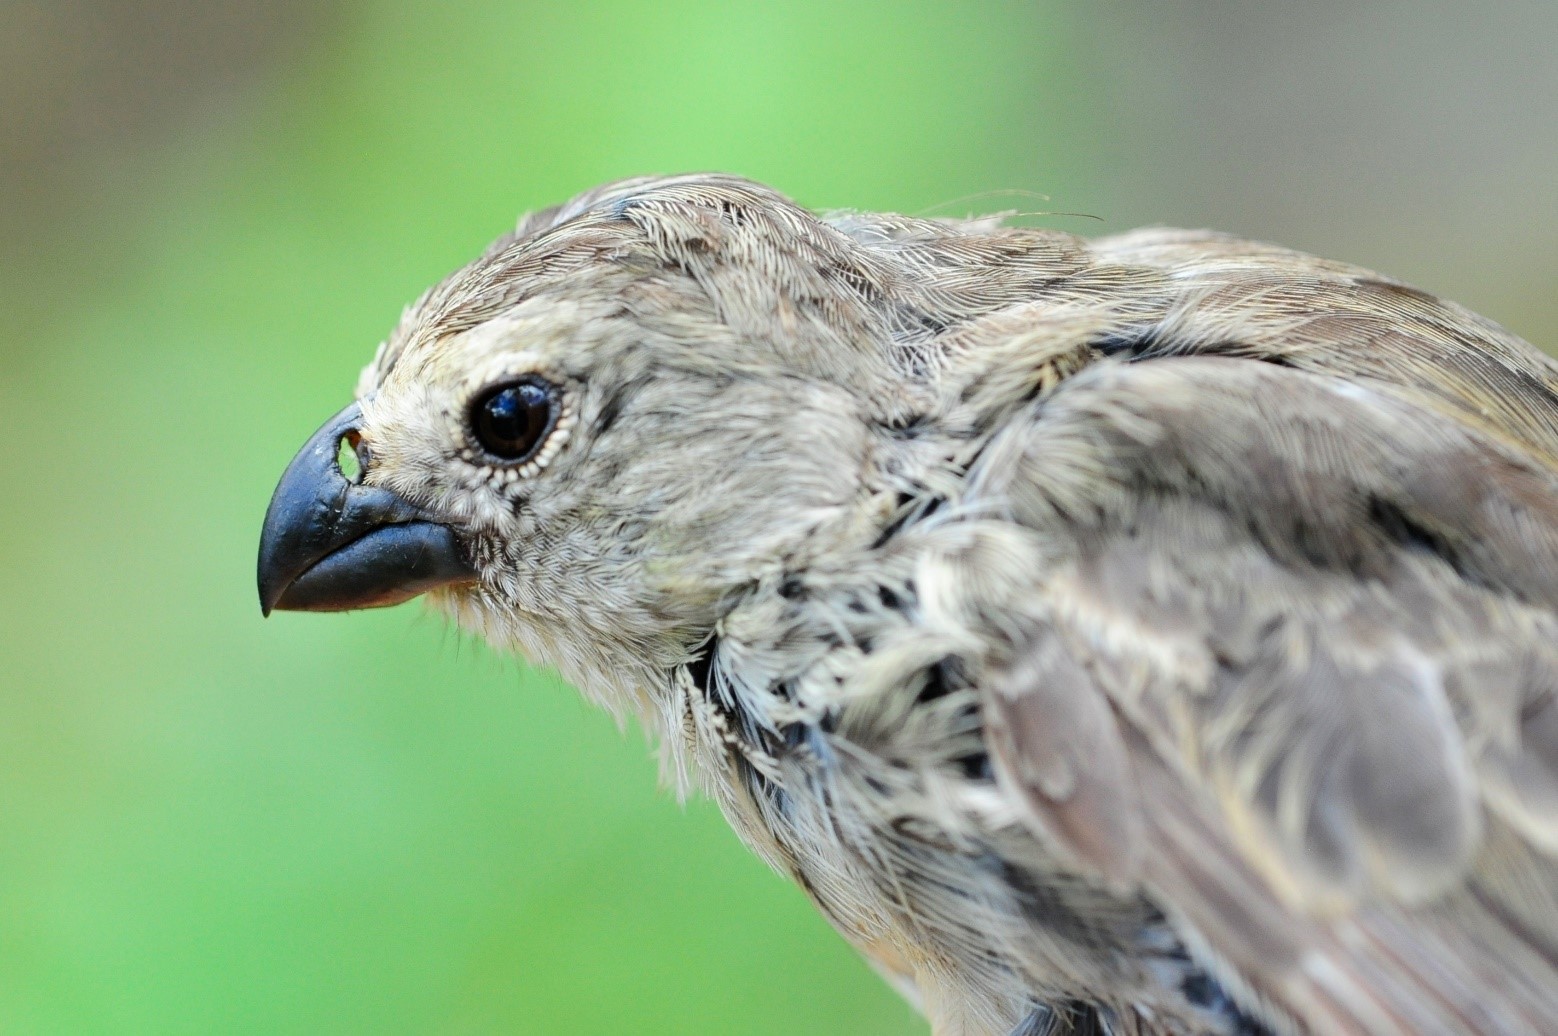 Small tree finch (Camarhynchus parvulus) with naris damage caused by larvae of the invasive parasitic fly Philornis downsi. Photo by Katharina J. Peters.